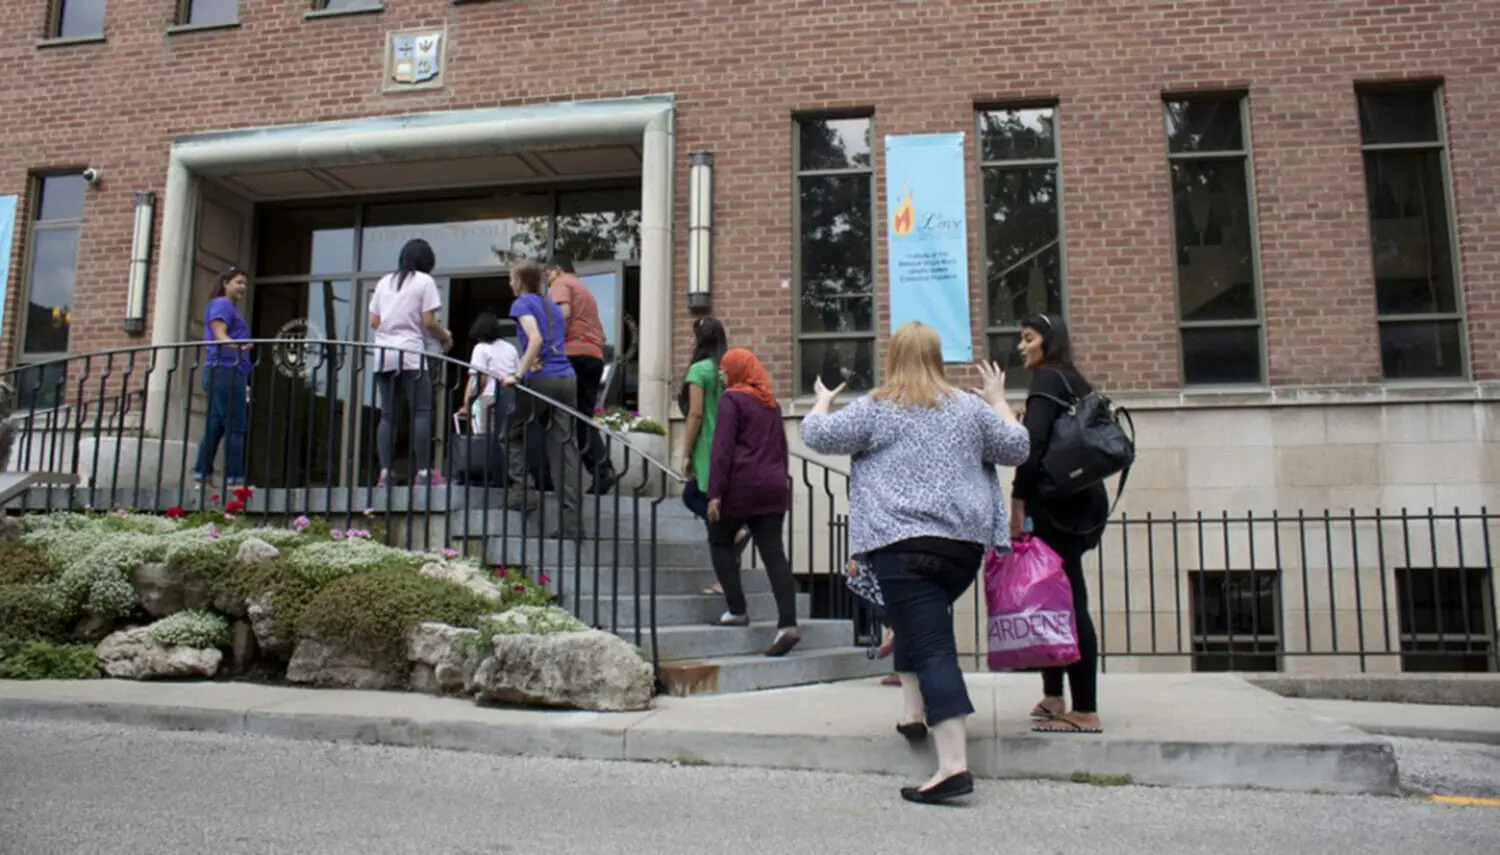 Students and parents at Loretto on moving day (photo by Carolyn Levett, The Varsity)